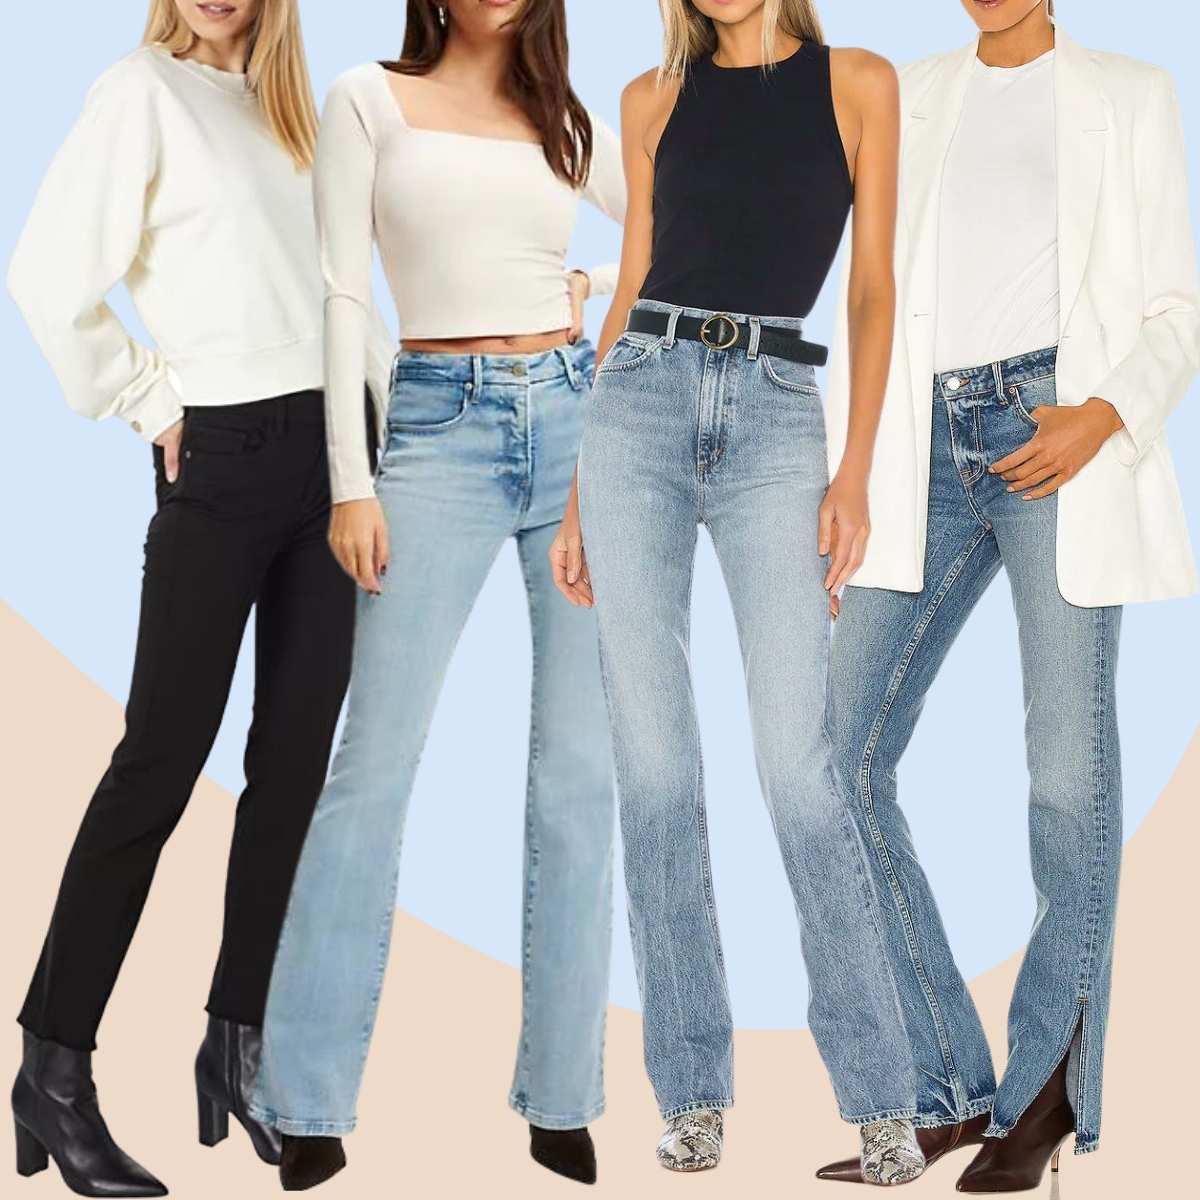 Collage of 4 women wearing pointed toe ankle boots and bootcut jeans outfits.